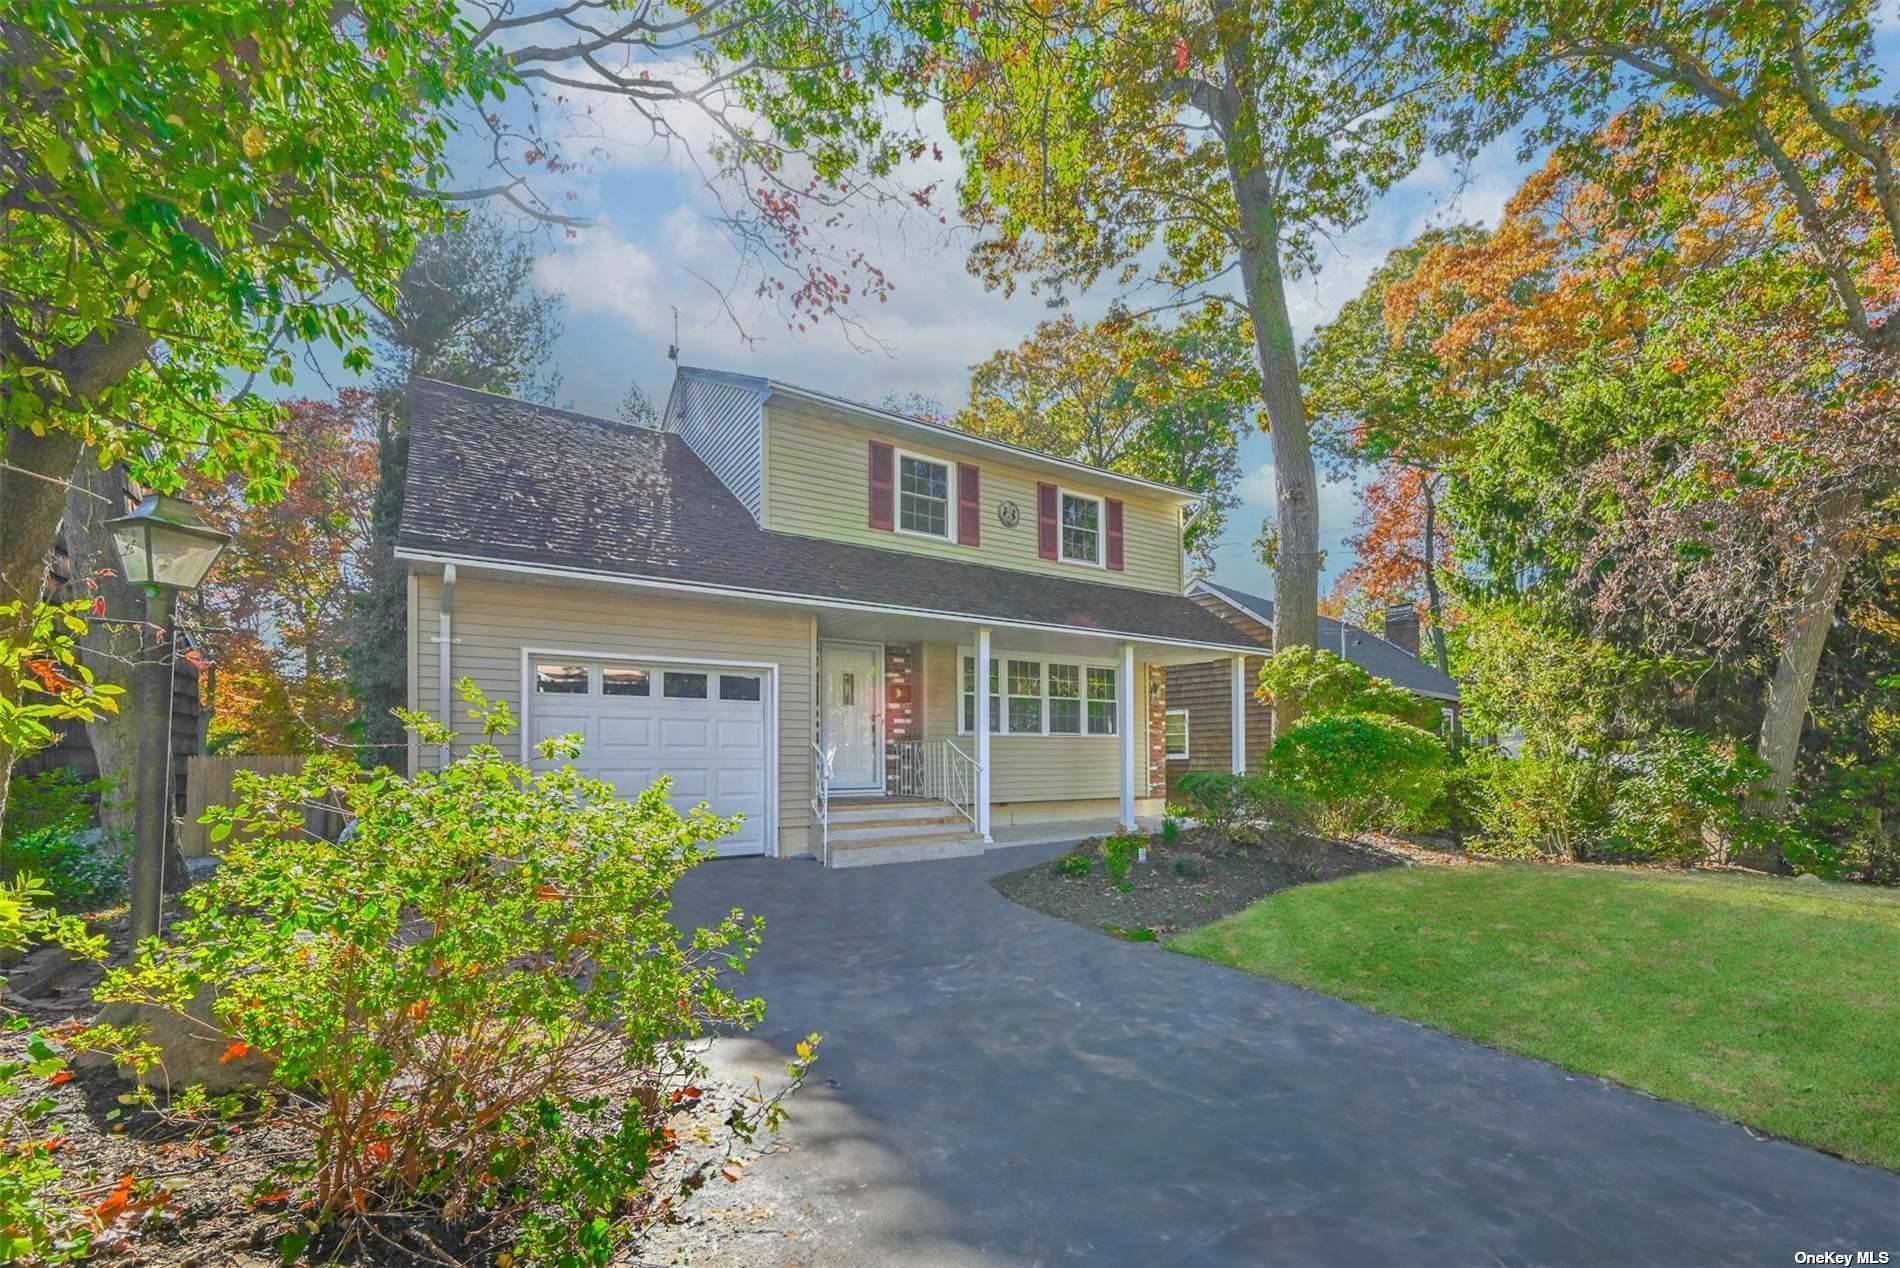 Step into this recently remodeled five bedroom colonial, featuring two full bathrooms and one half bathroom.